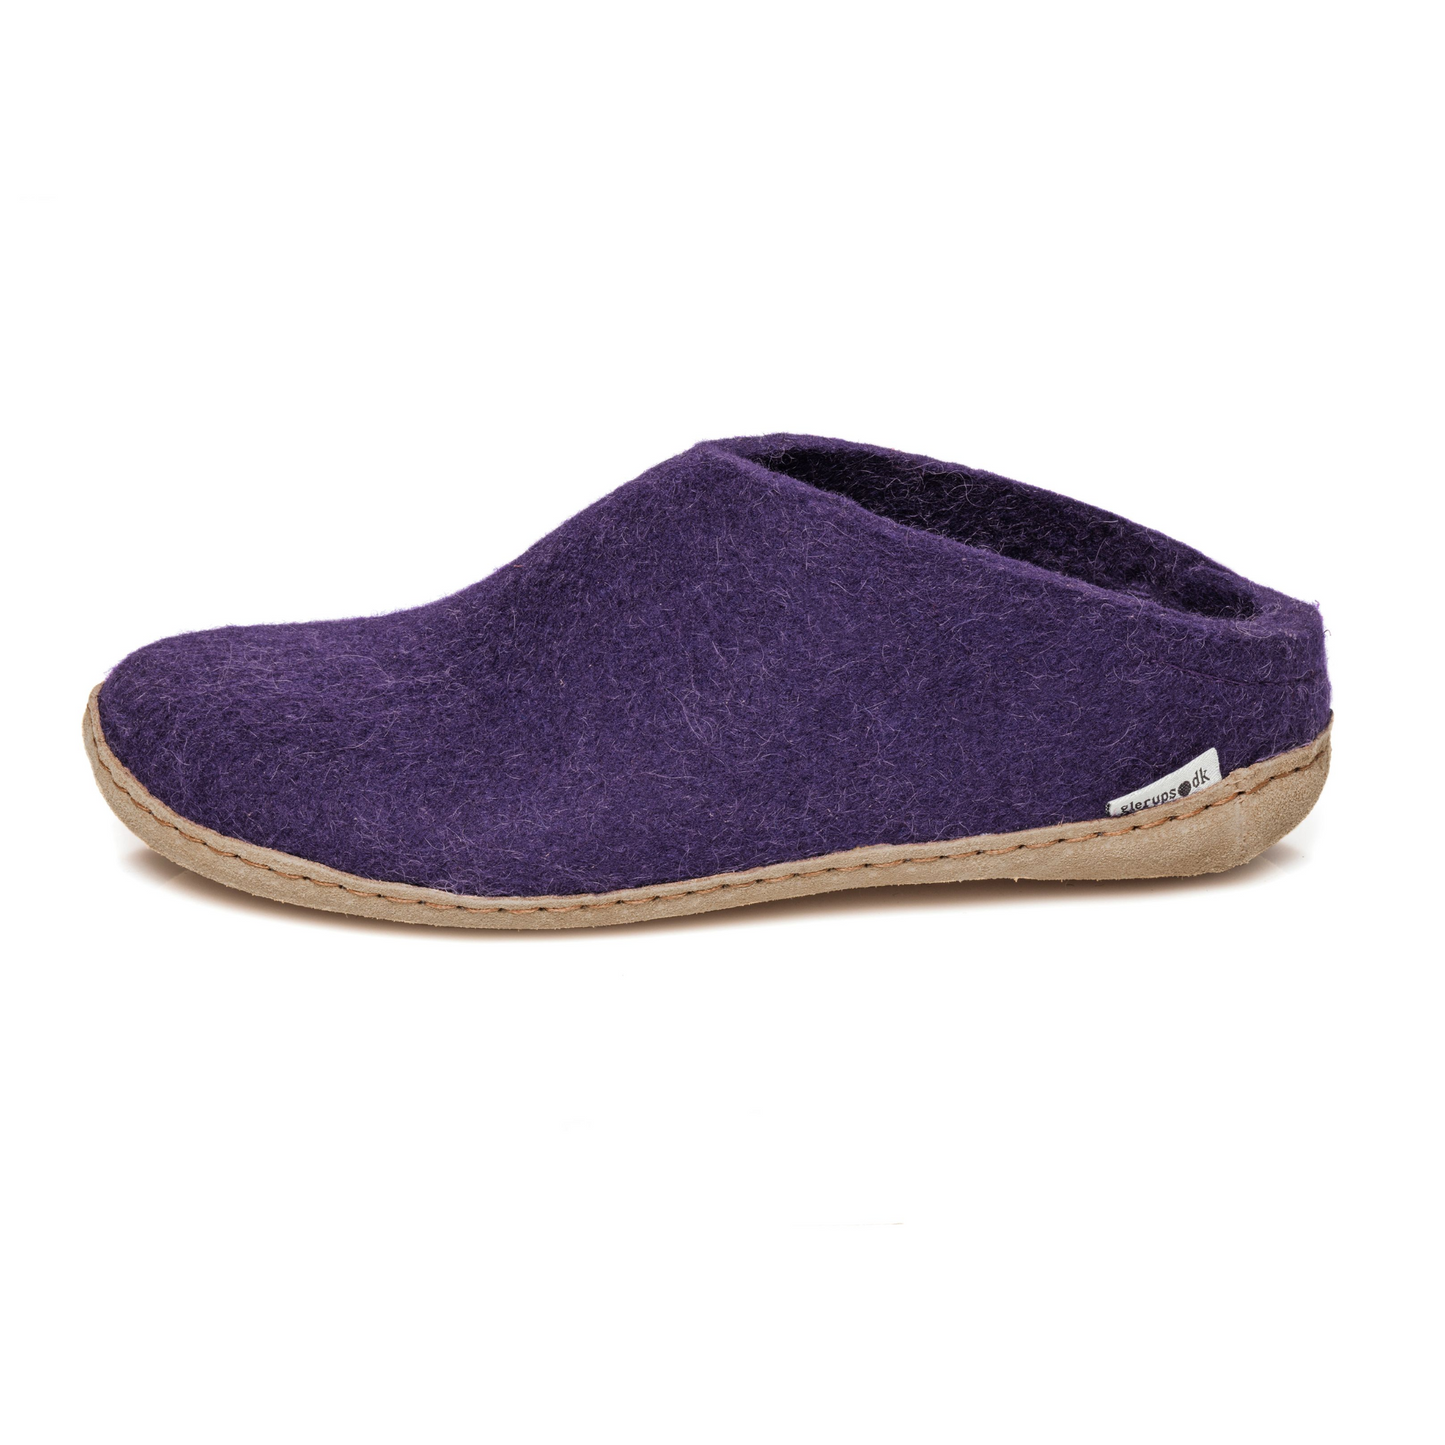 A deep purple felted slipper is pictured in profile showing the low back of the heel and the tan stitched leather sole.